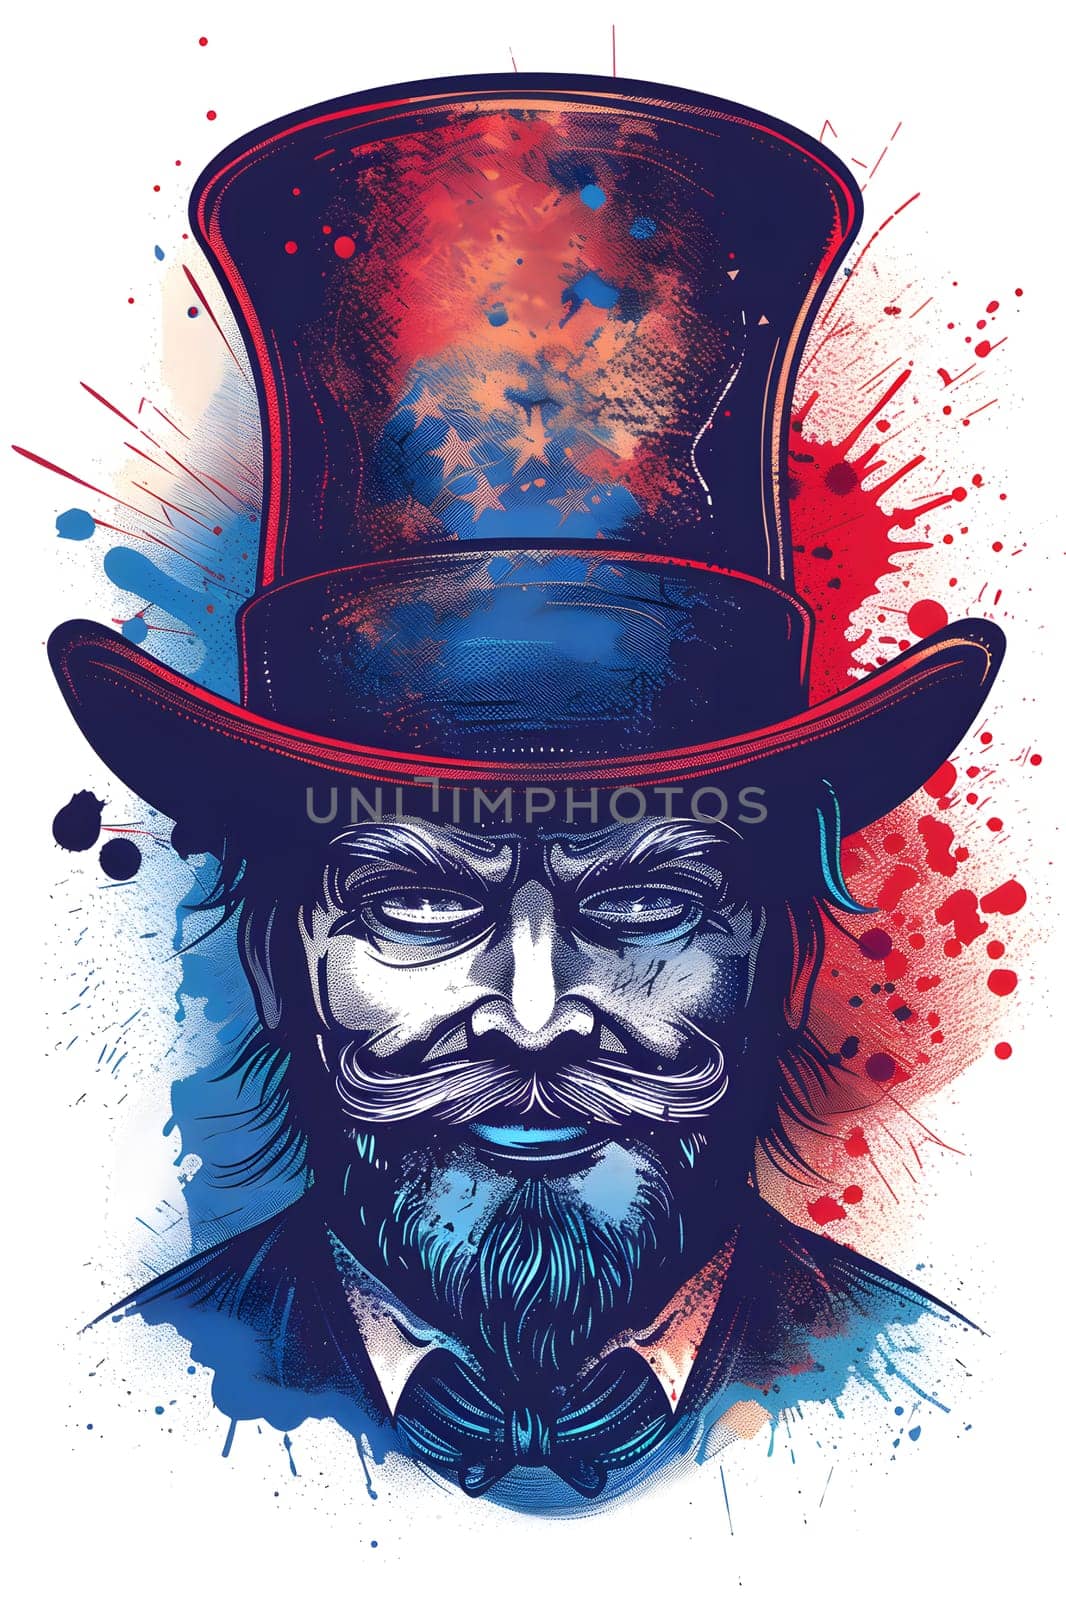 A man with facial hair wearing a blue sleeve costume hat and fedora, resembling a painting character with art vibes and unique headgear